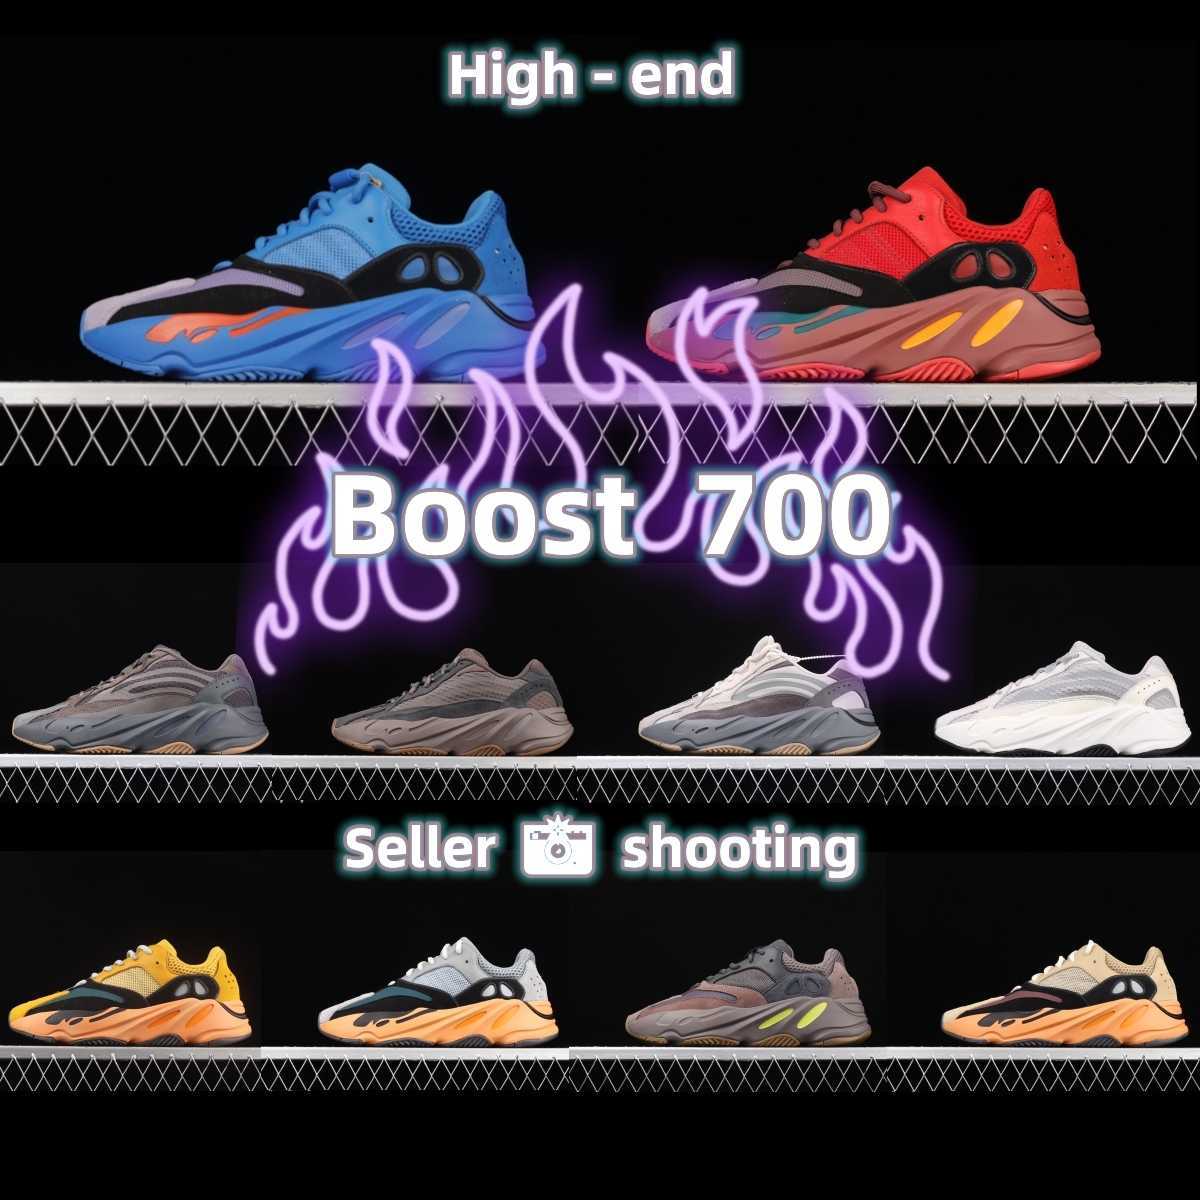 

2023 700s V3 New Designer Running shoes tn Outdoor sneaker boost Top trainer low Shoes Men Women sports originality casual retro classic 36-45 size, 25